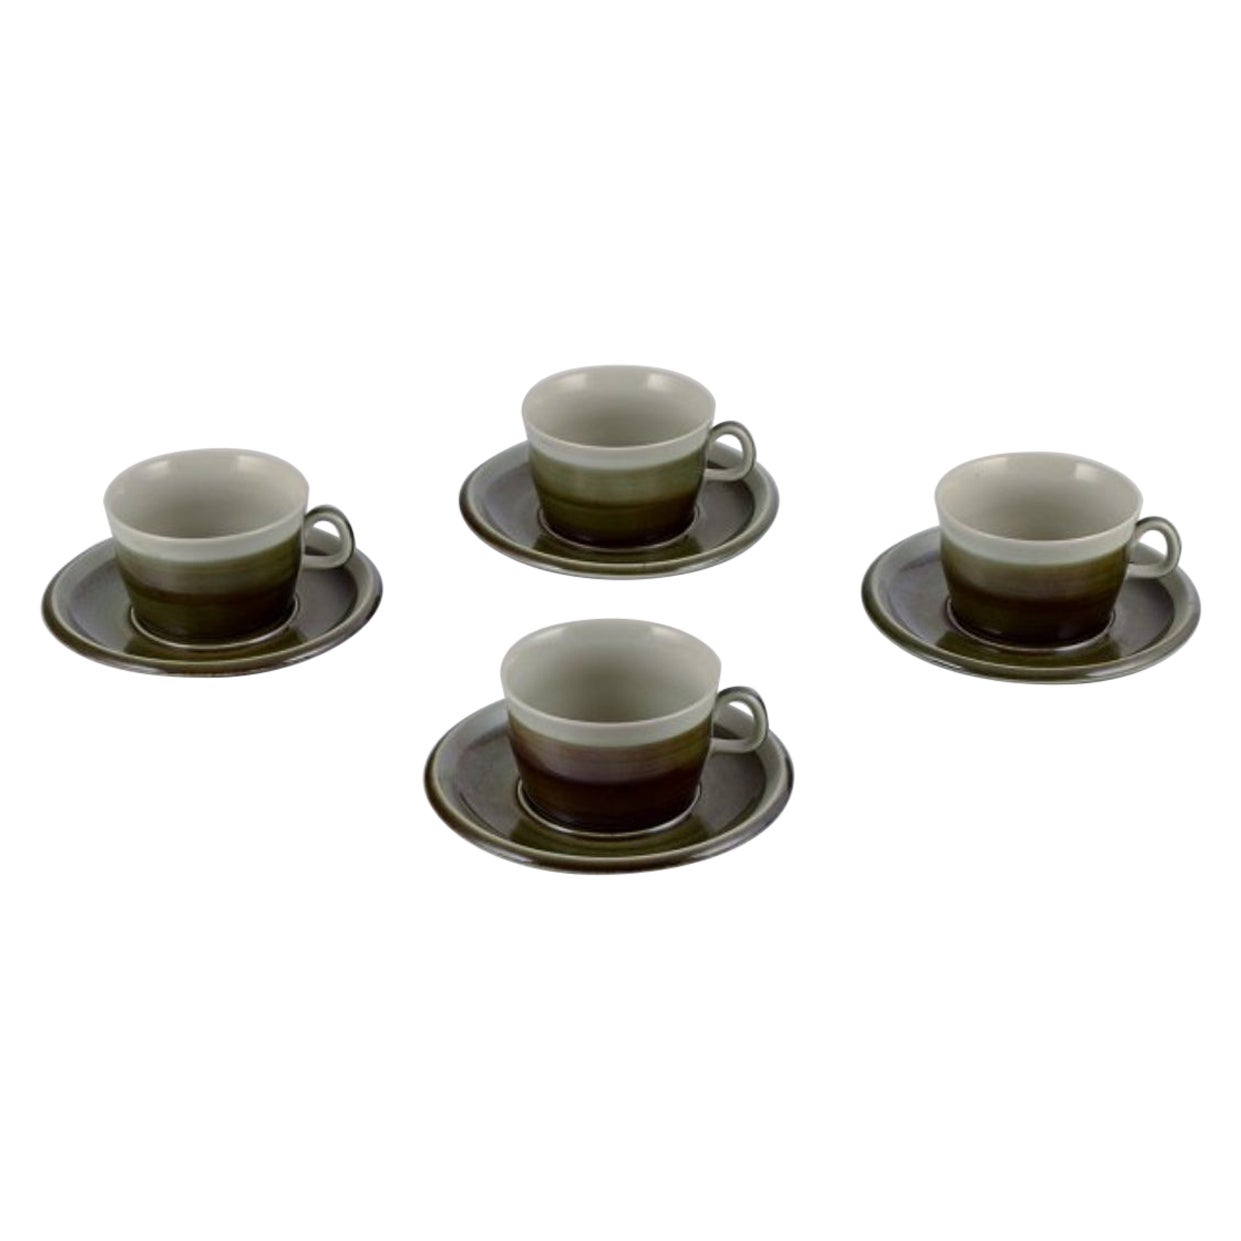 Marianne Westman for Rörstrand. "Maya" series. Four coffee cups and saucers.  For Sale